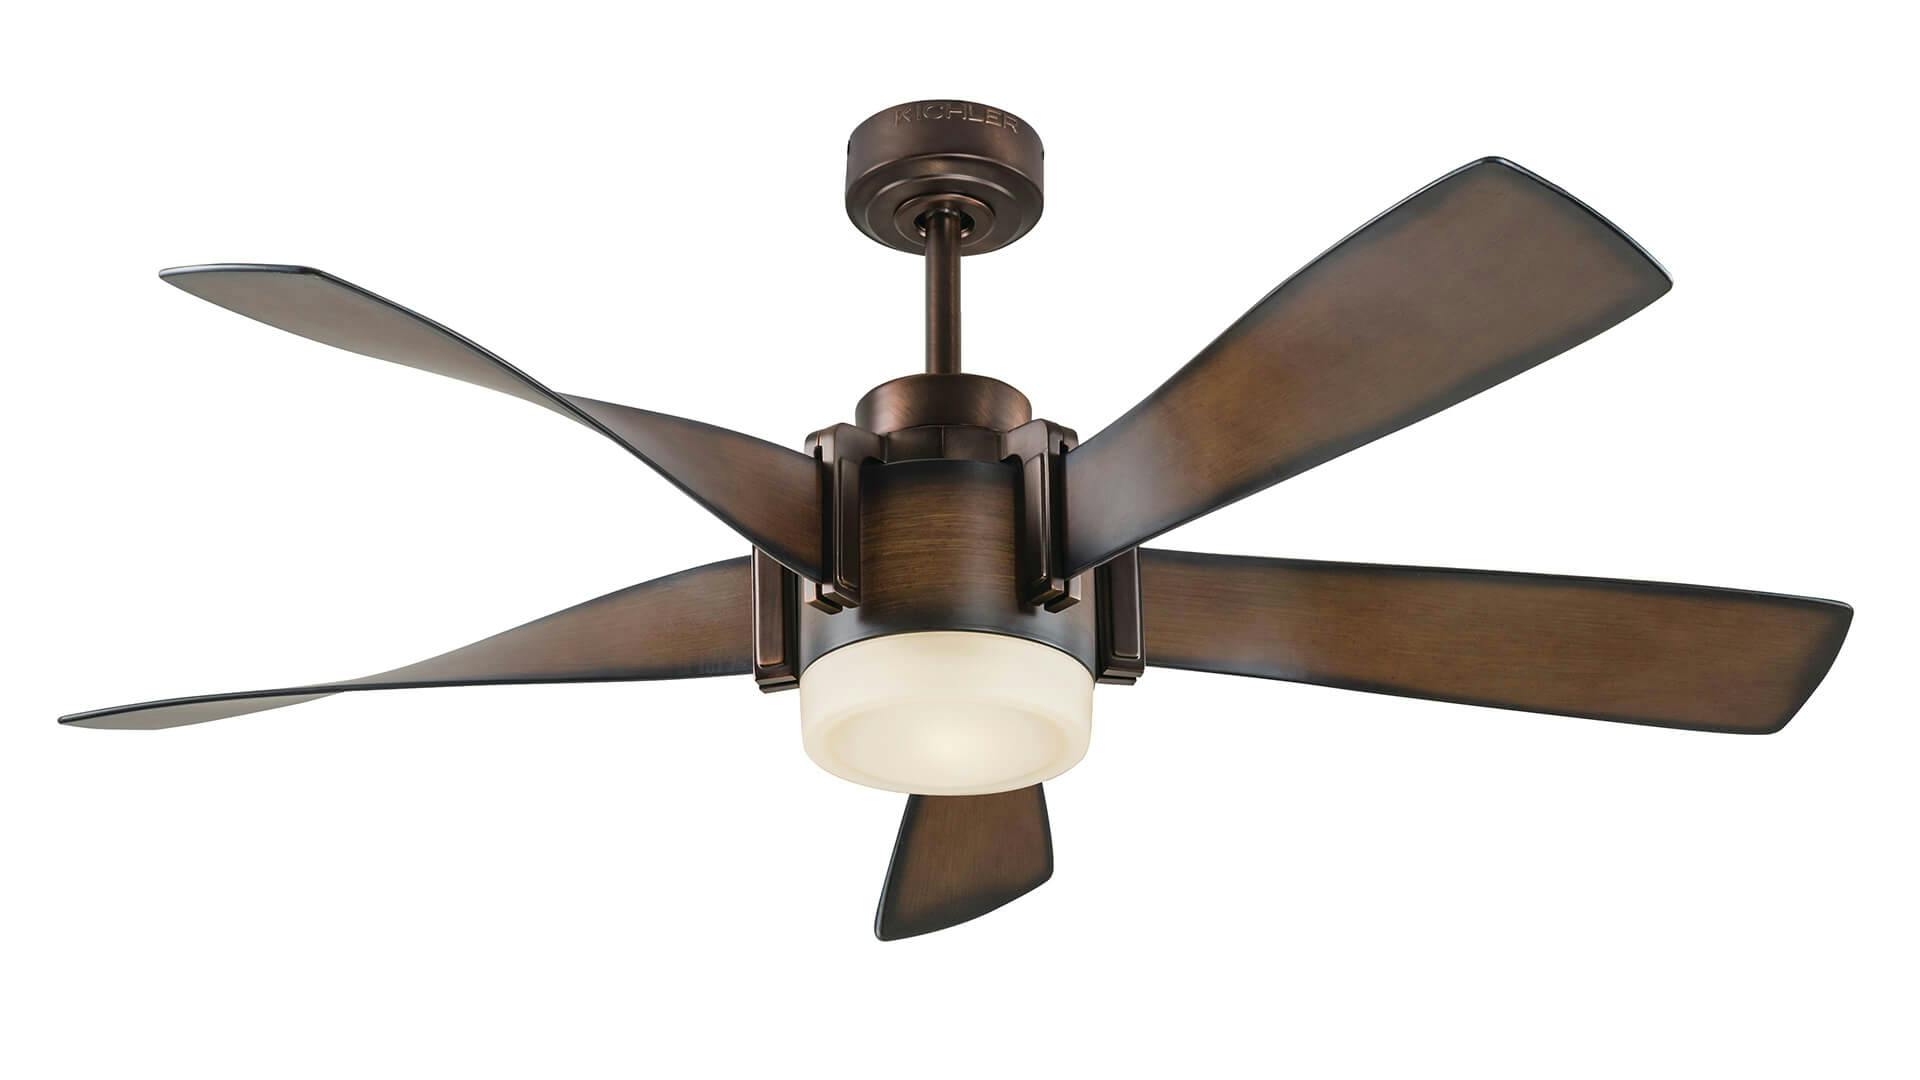 35153 Ceiling Fan on white background.